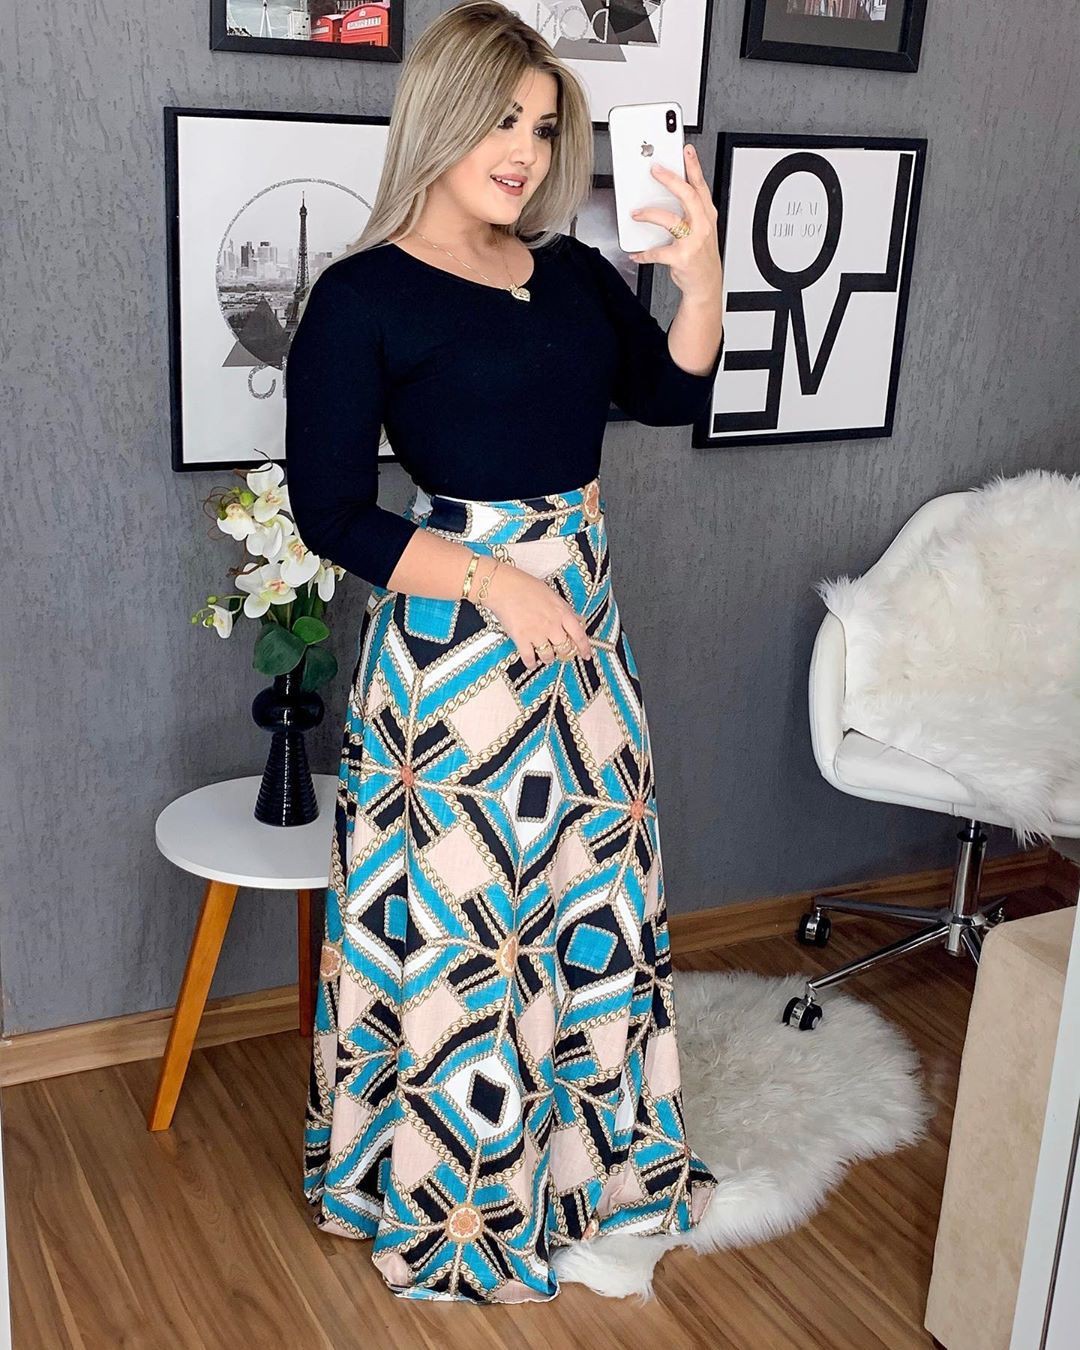 Cute Everyday Outfits For Date Night: Plus size outfit,  Trendy Dates Outfit,  Cute Date Night Outfit,  Plus Size Date Night Outfit,  Classy Dates Outfit,  Date Night Outfit  